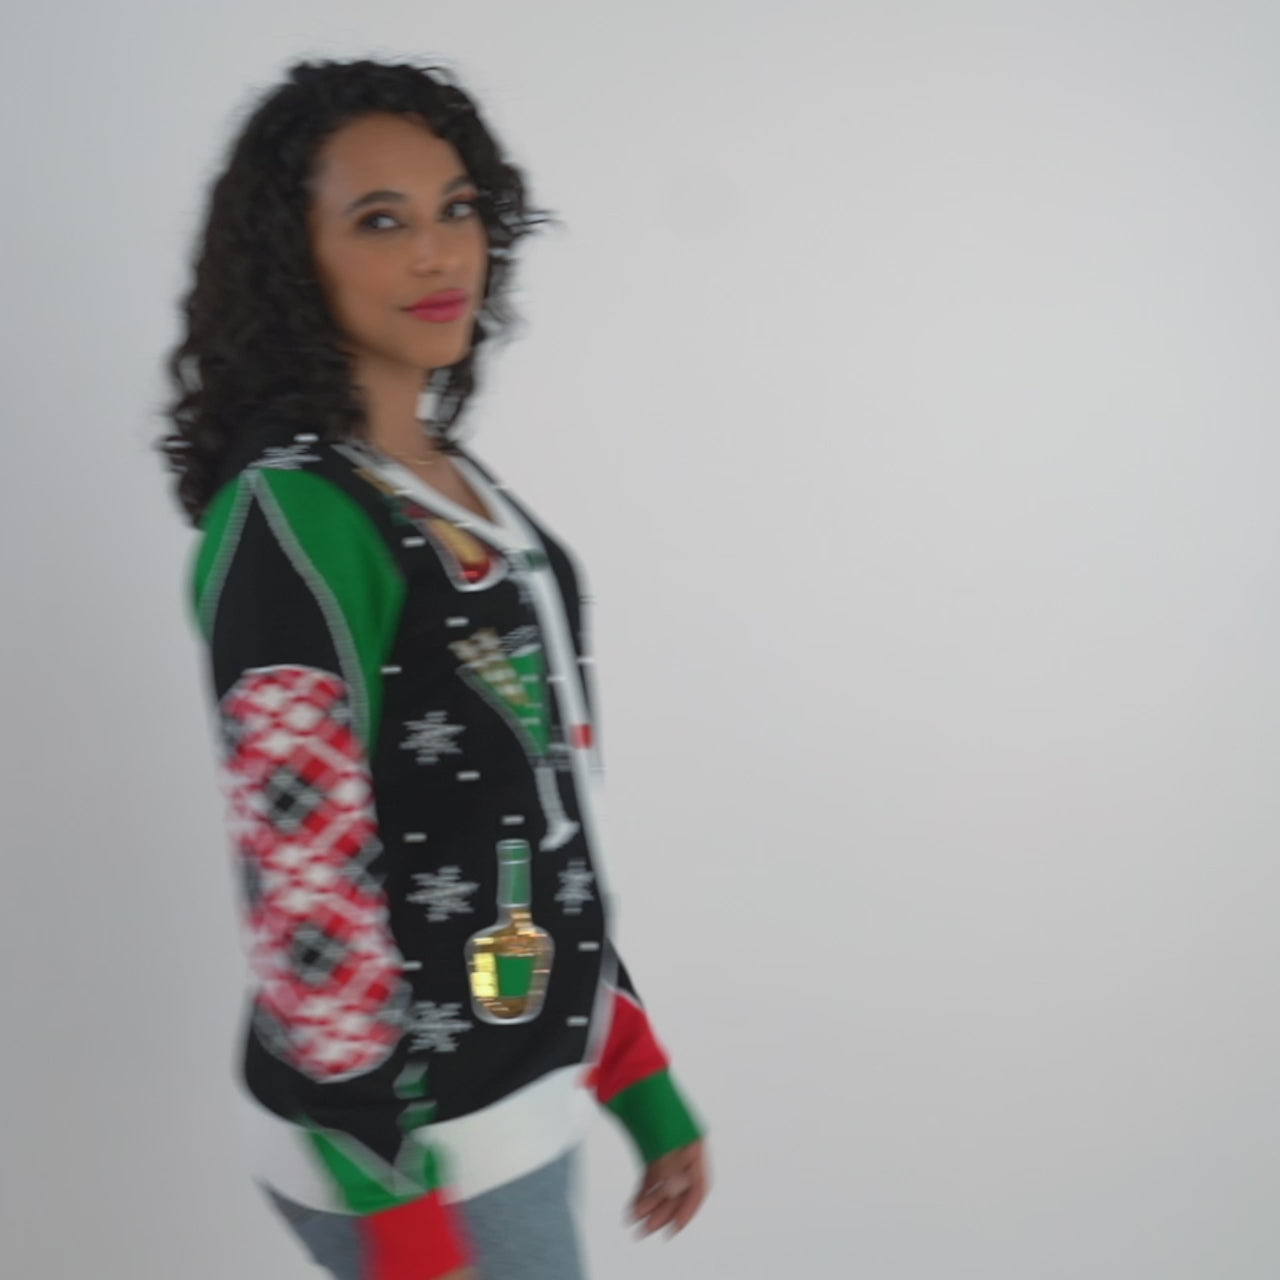 Women's Mix and Be Merry Christmas Cardigan Sweater Image 3